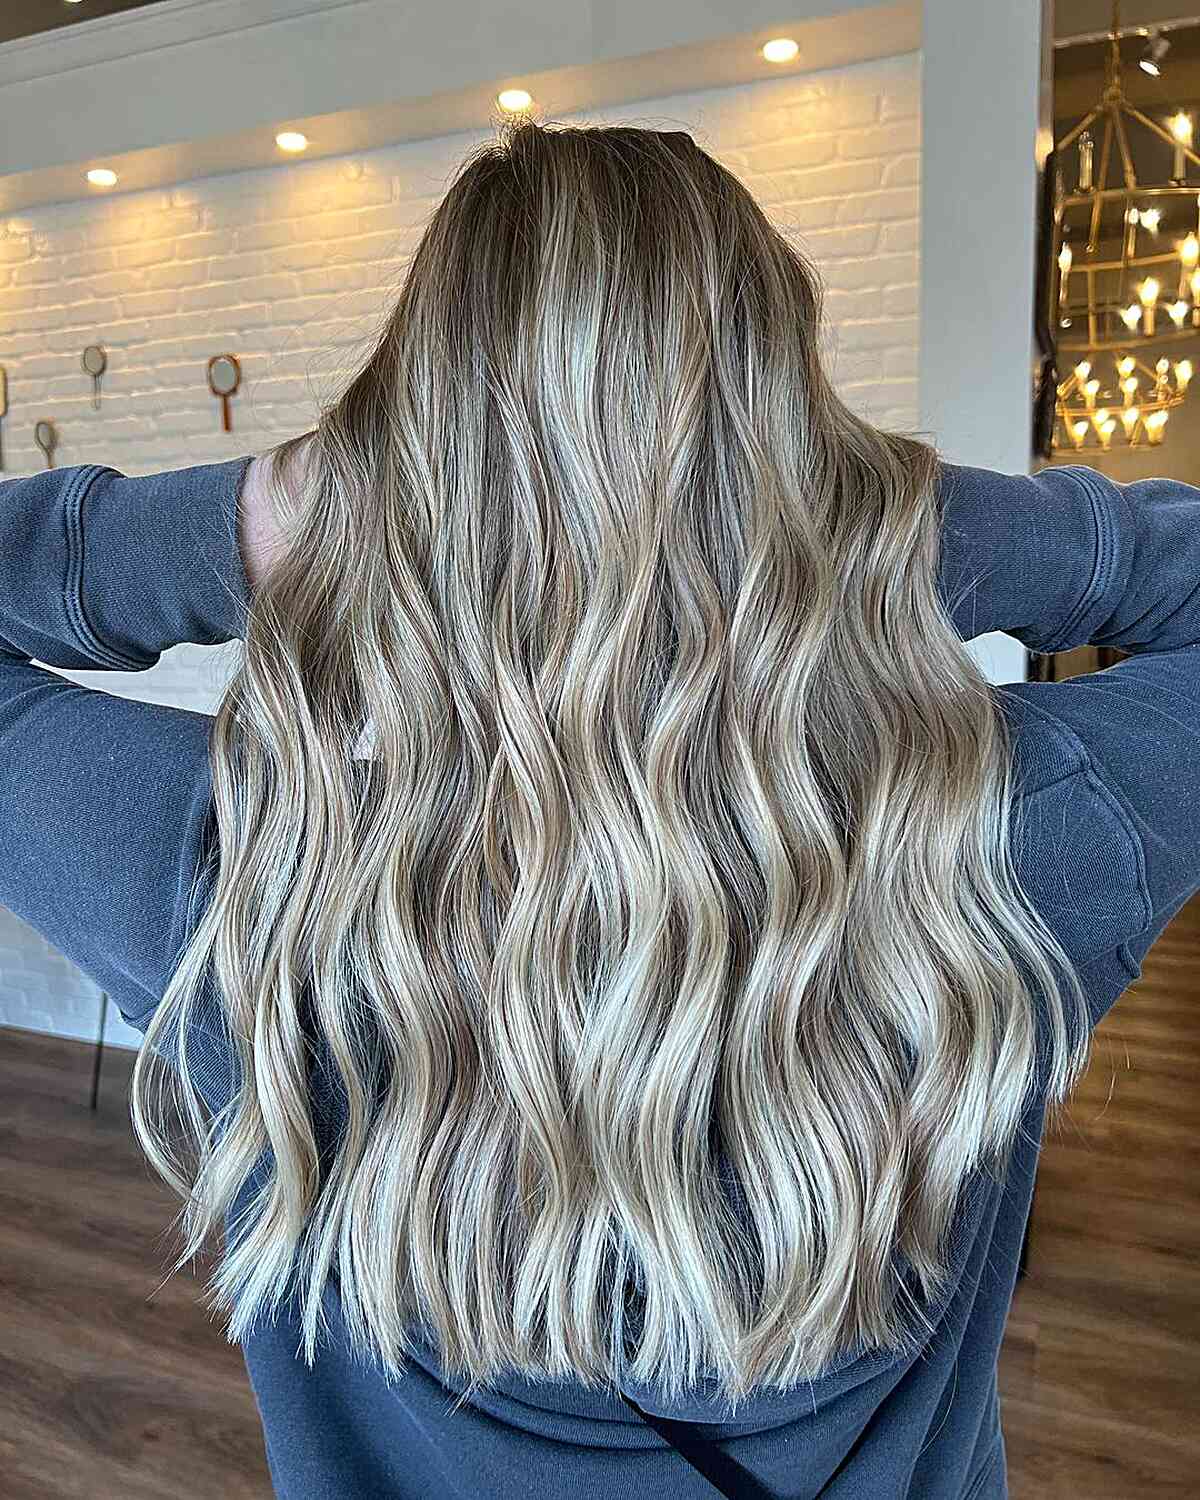 Long Multi-Dimensional Toasted Coconut Icy Balayage Hair with Beach Waves